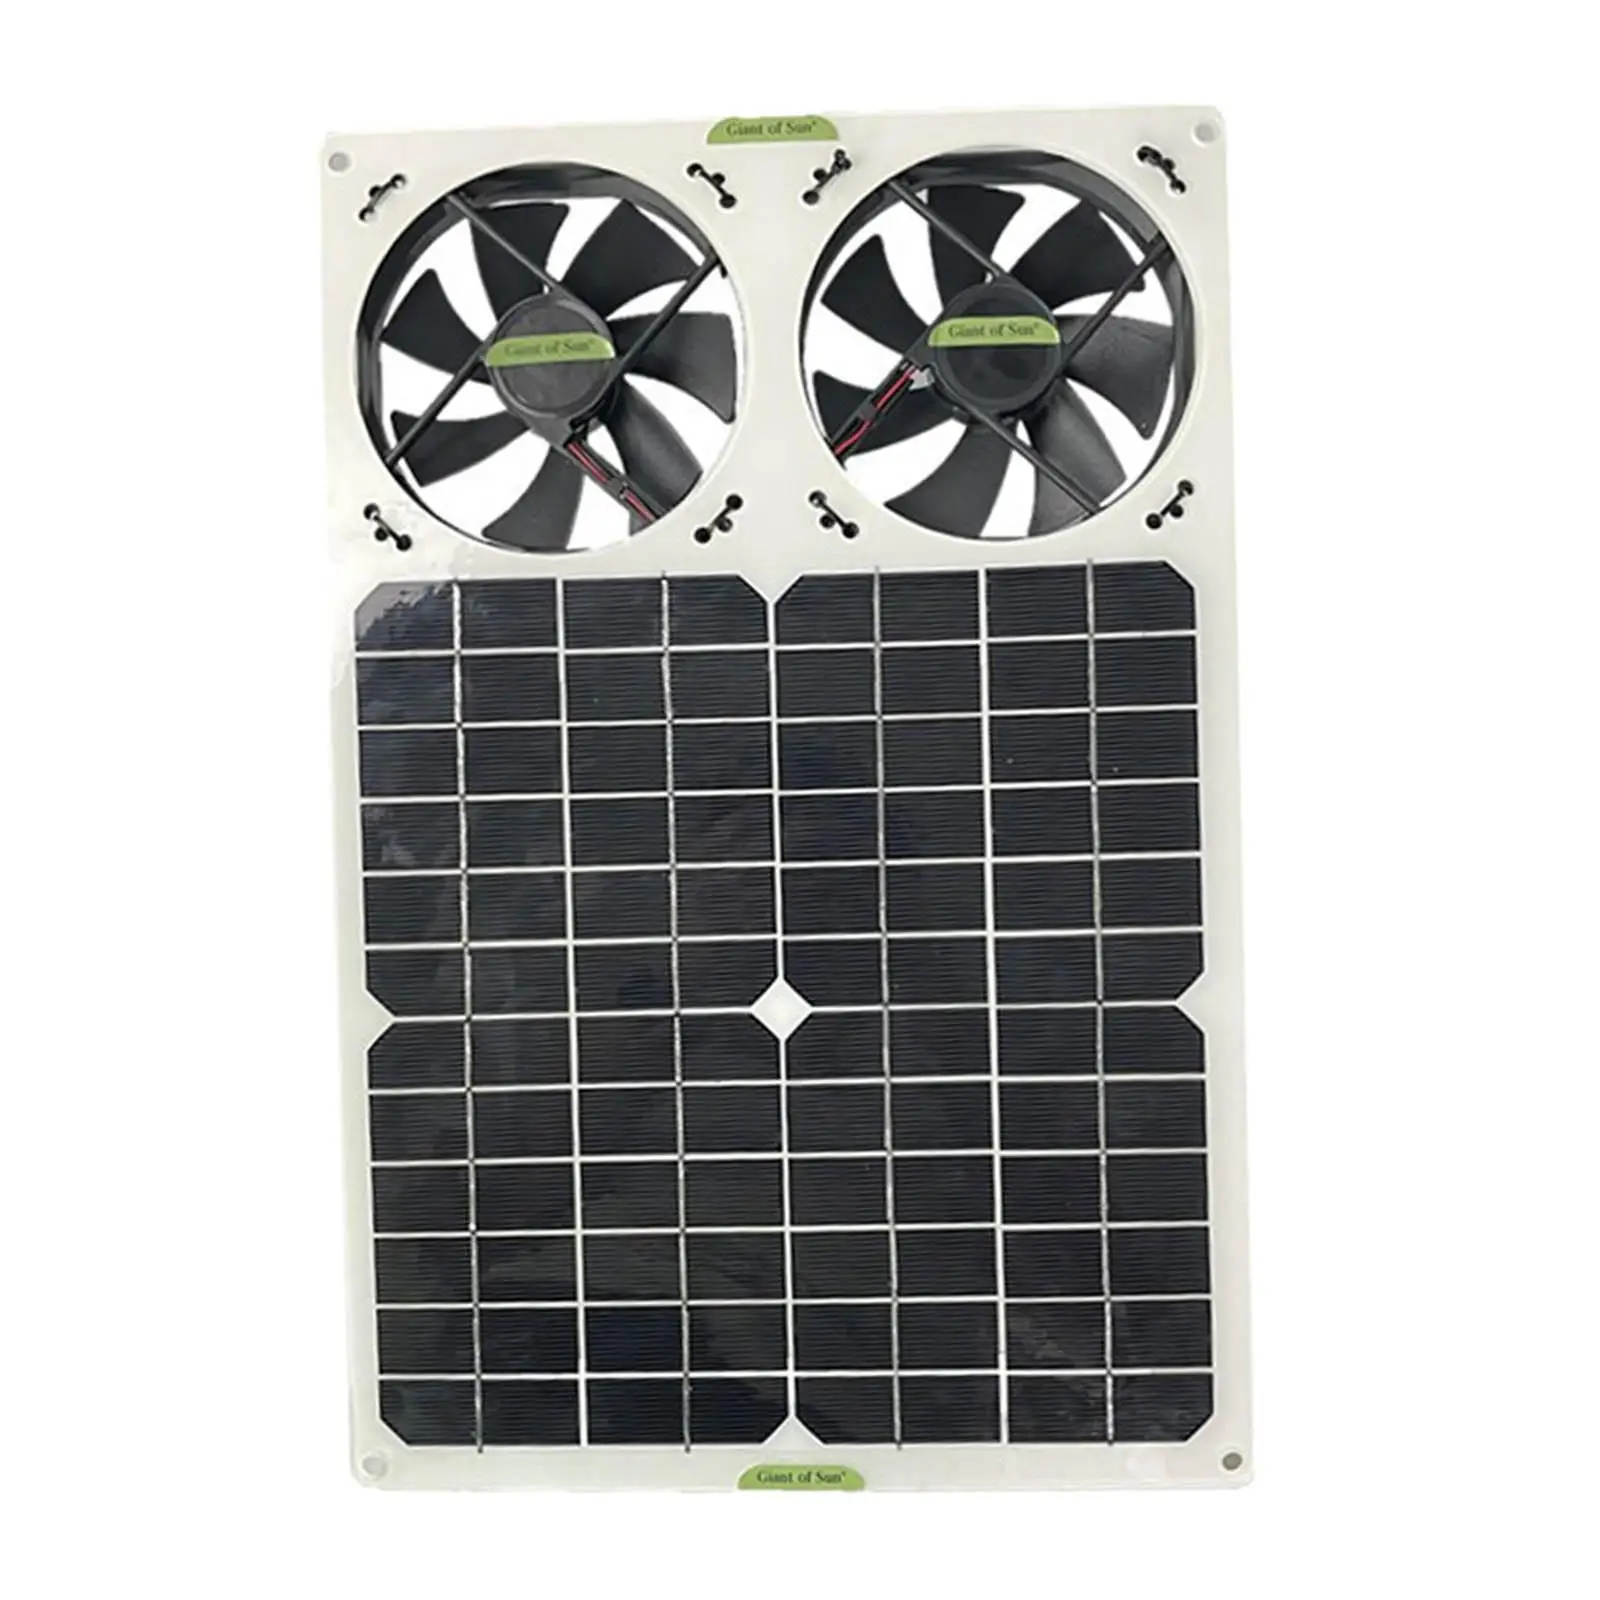 40W Solar Panel Powered Fan Exhaust Fan Ventilator Waterproof Ventilates 6 in for Touring Car Dog House Camping Chicken Coop RV